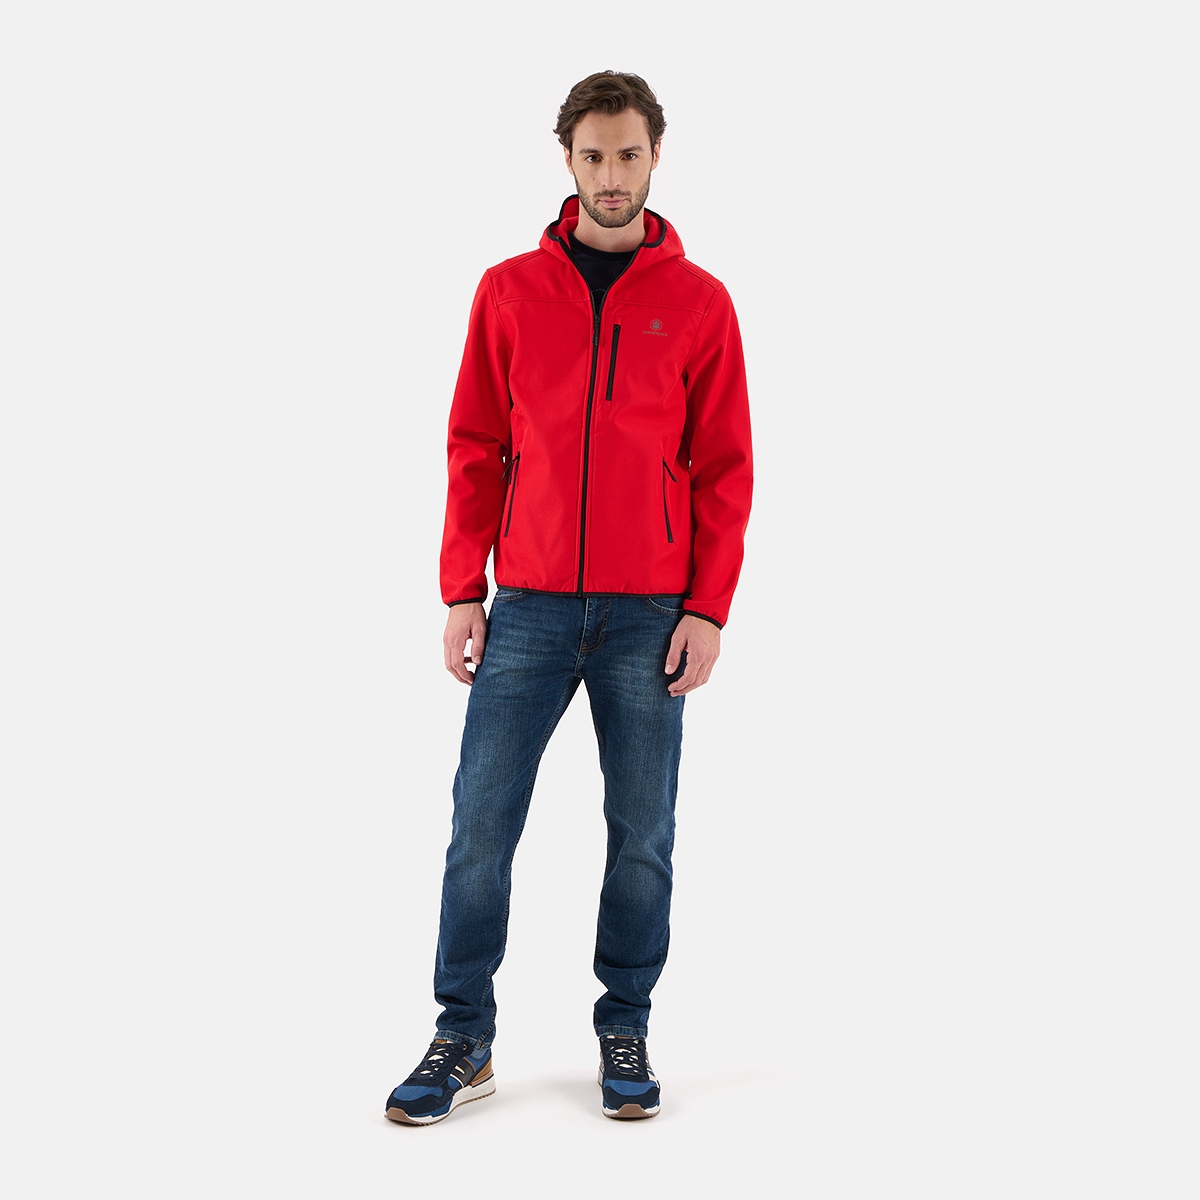 Jackets Products | Latest Trend Jackets Products | Lumberjack